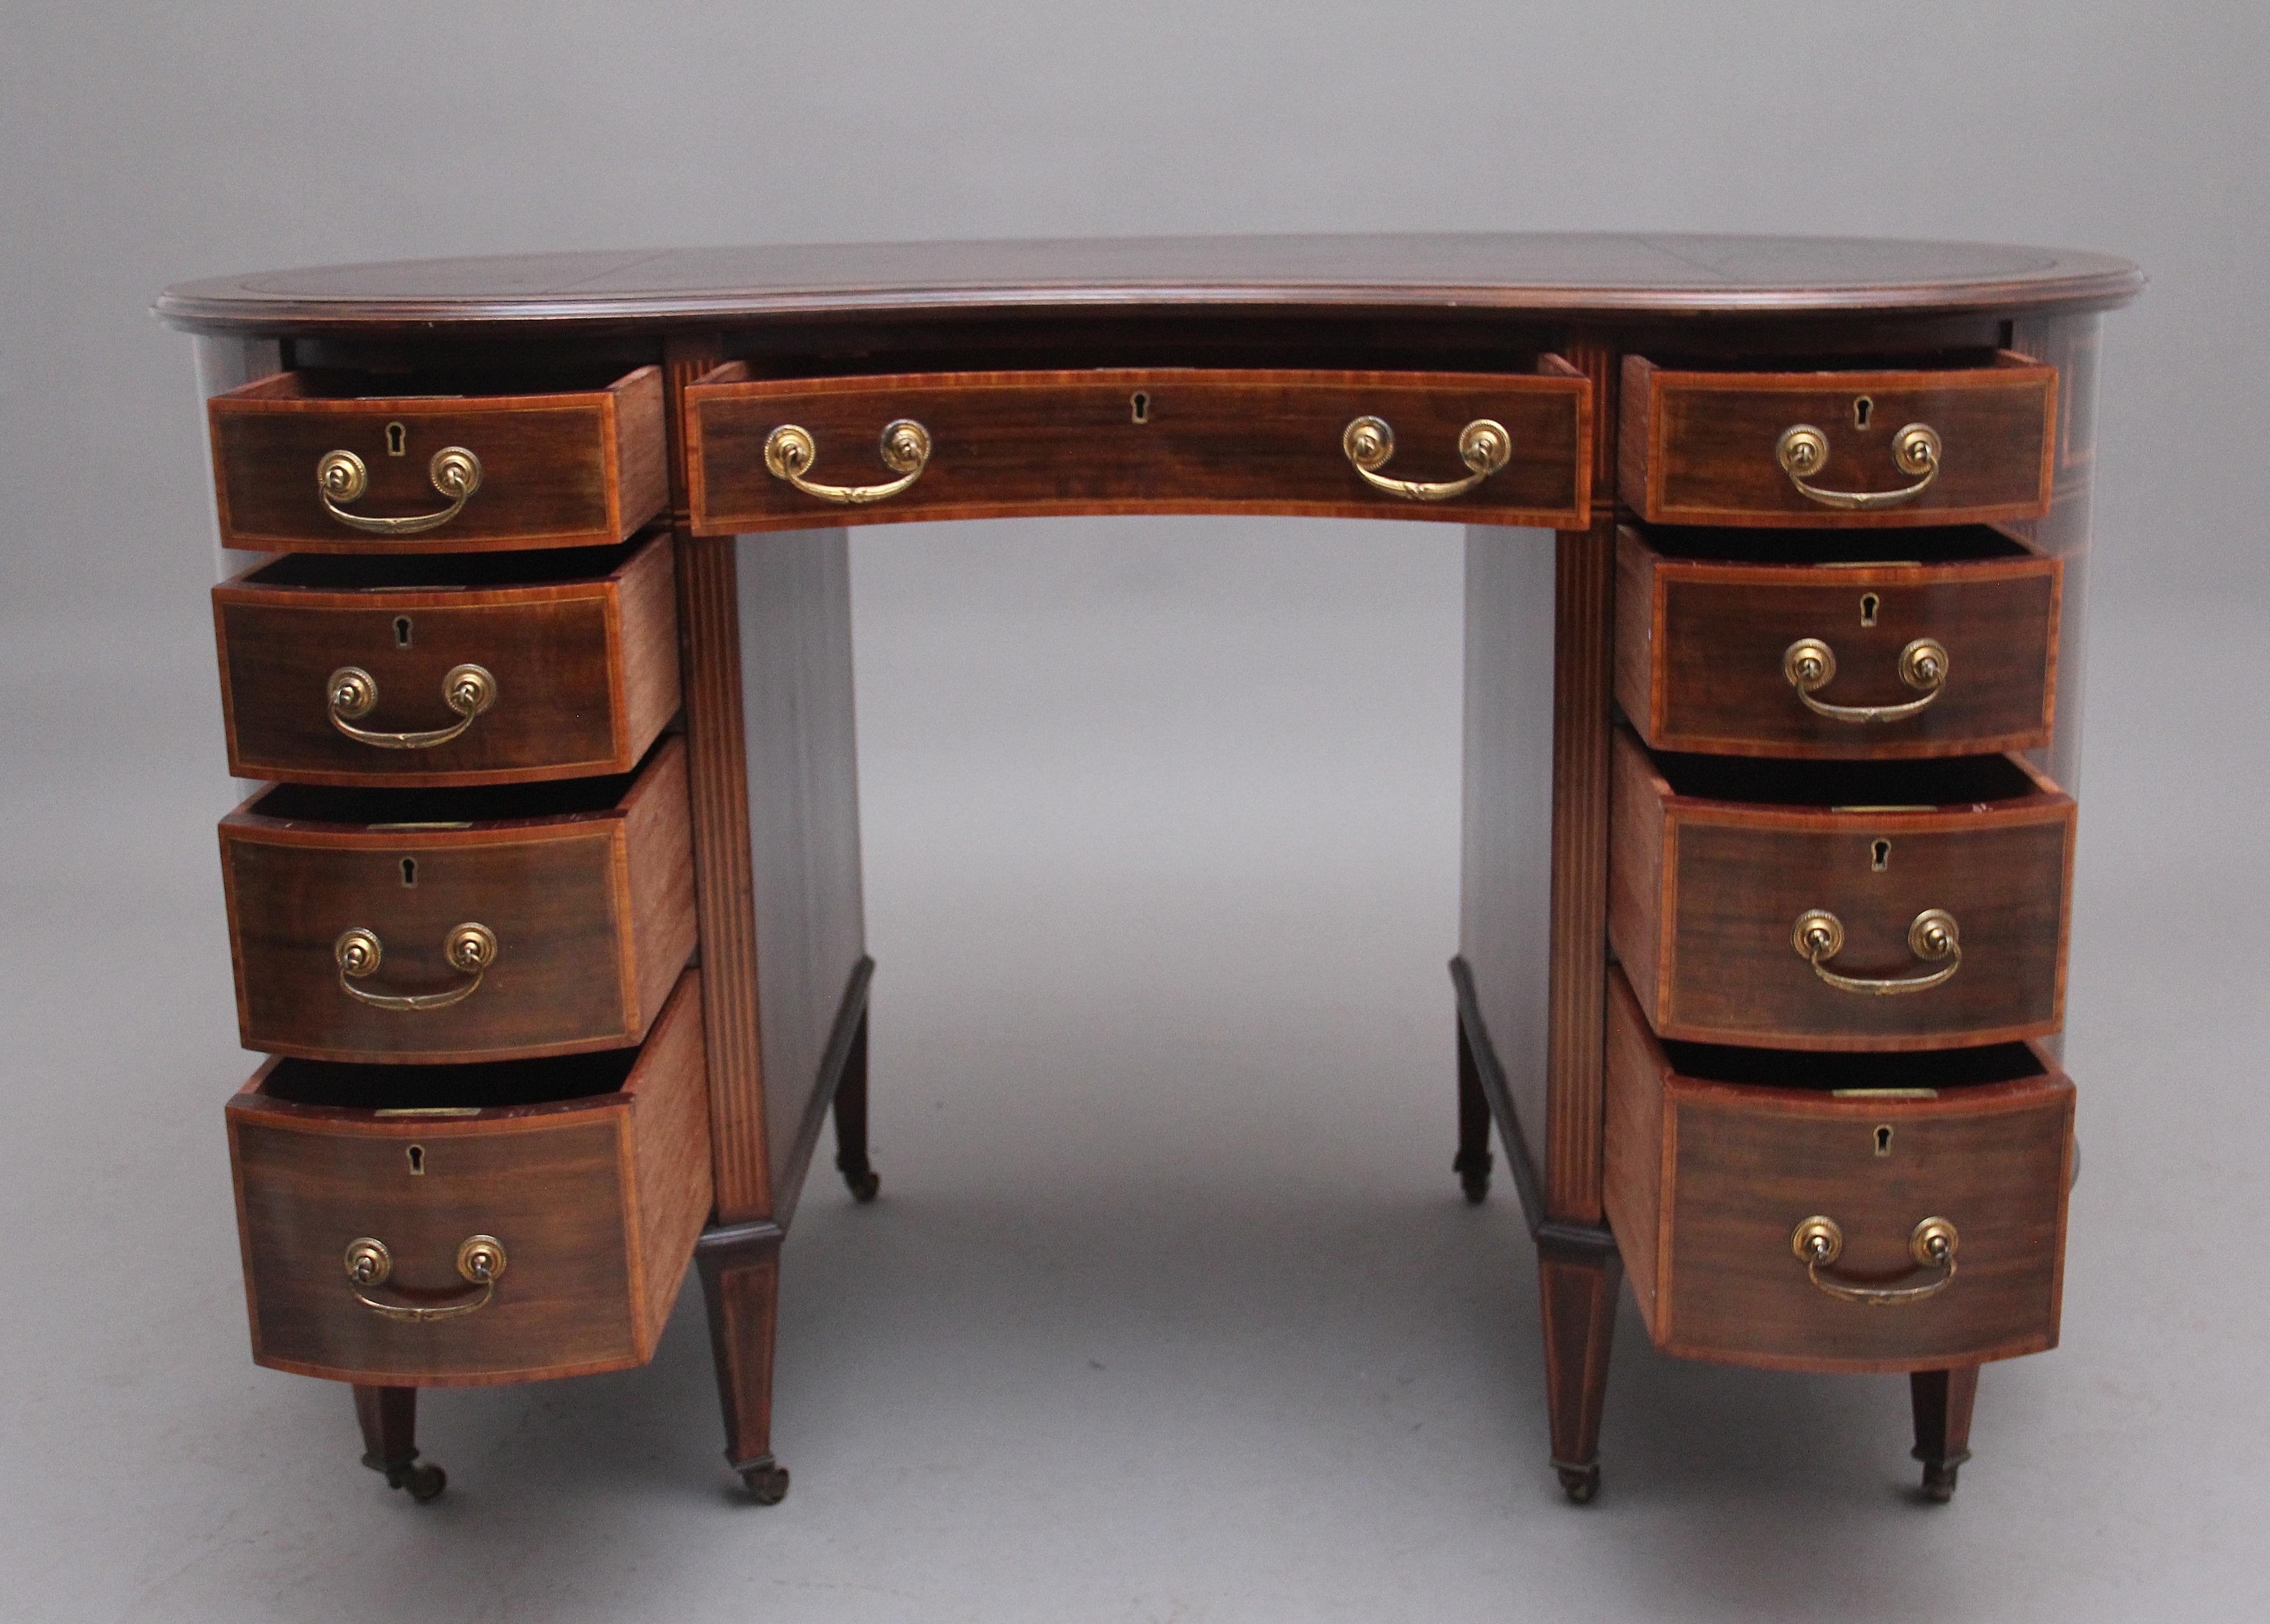 A fine quality 19th Century inlaid mahogany kidney shaped desk with tulipwood, satinwood and boxwood stringing, the shaped and moulded edge top having a tan brown leather writing surface decorated with blind tooling, there is a combination of nice